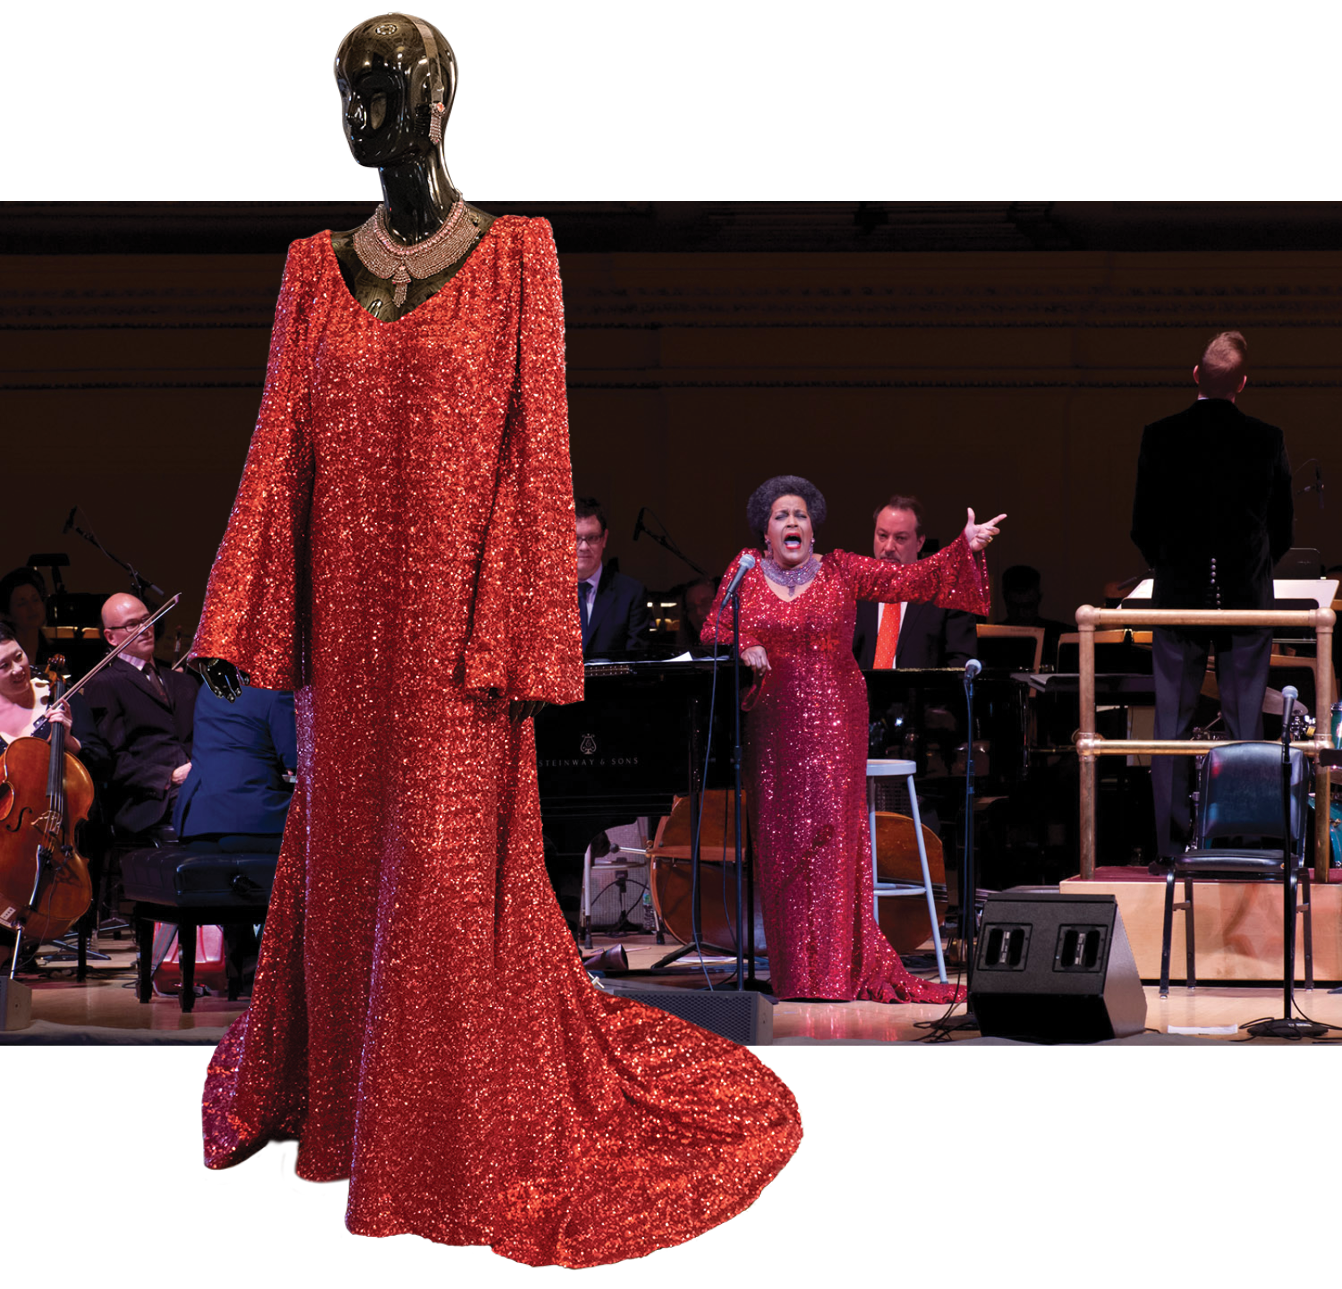 The dress Evers-Williams wore at Carnegie Hall in 2012 when she was invited to fulfill a lifelong dream by performing onstage there. Photo by Stefan Cohen.